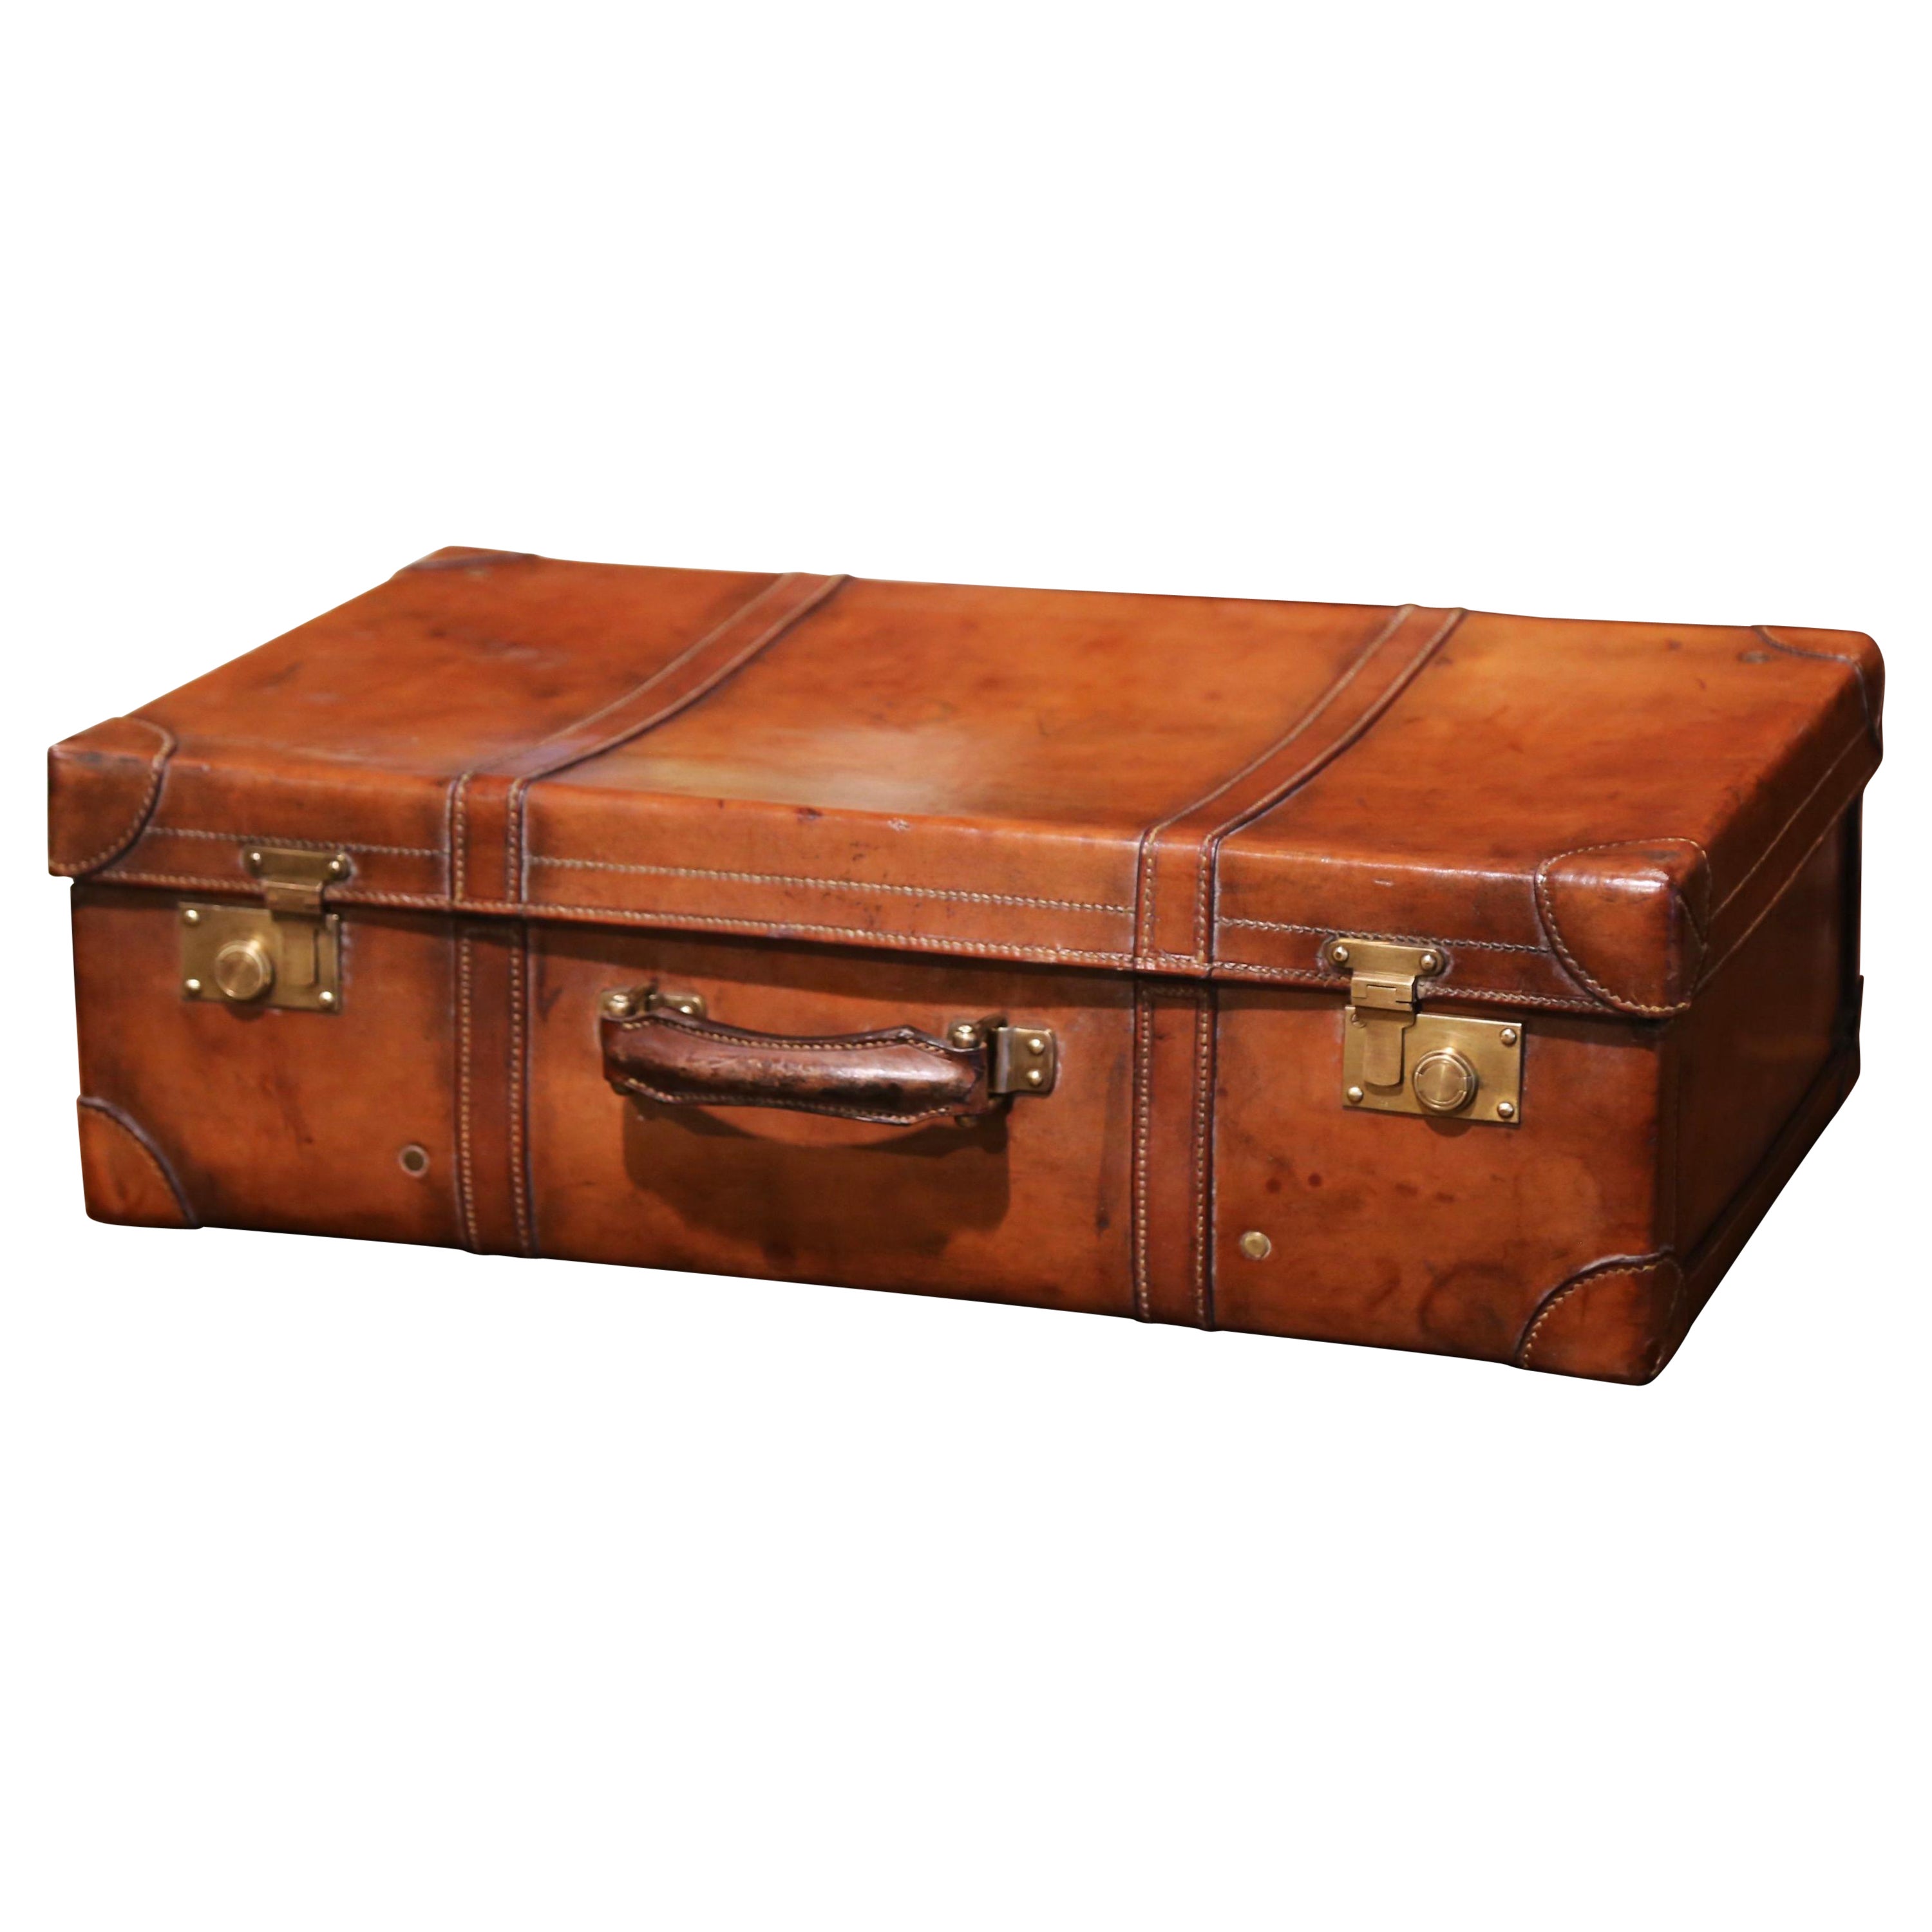 Early 20th Century French Leather Suitcase with Inside Upholstery and Tray